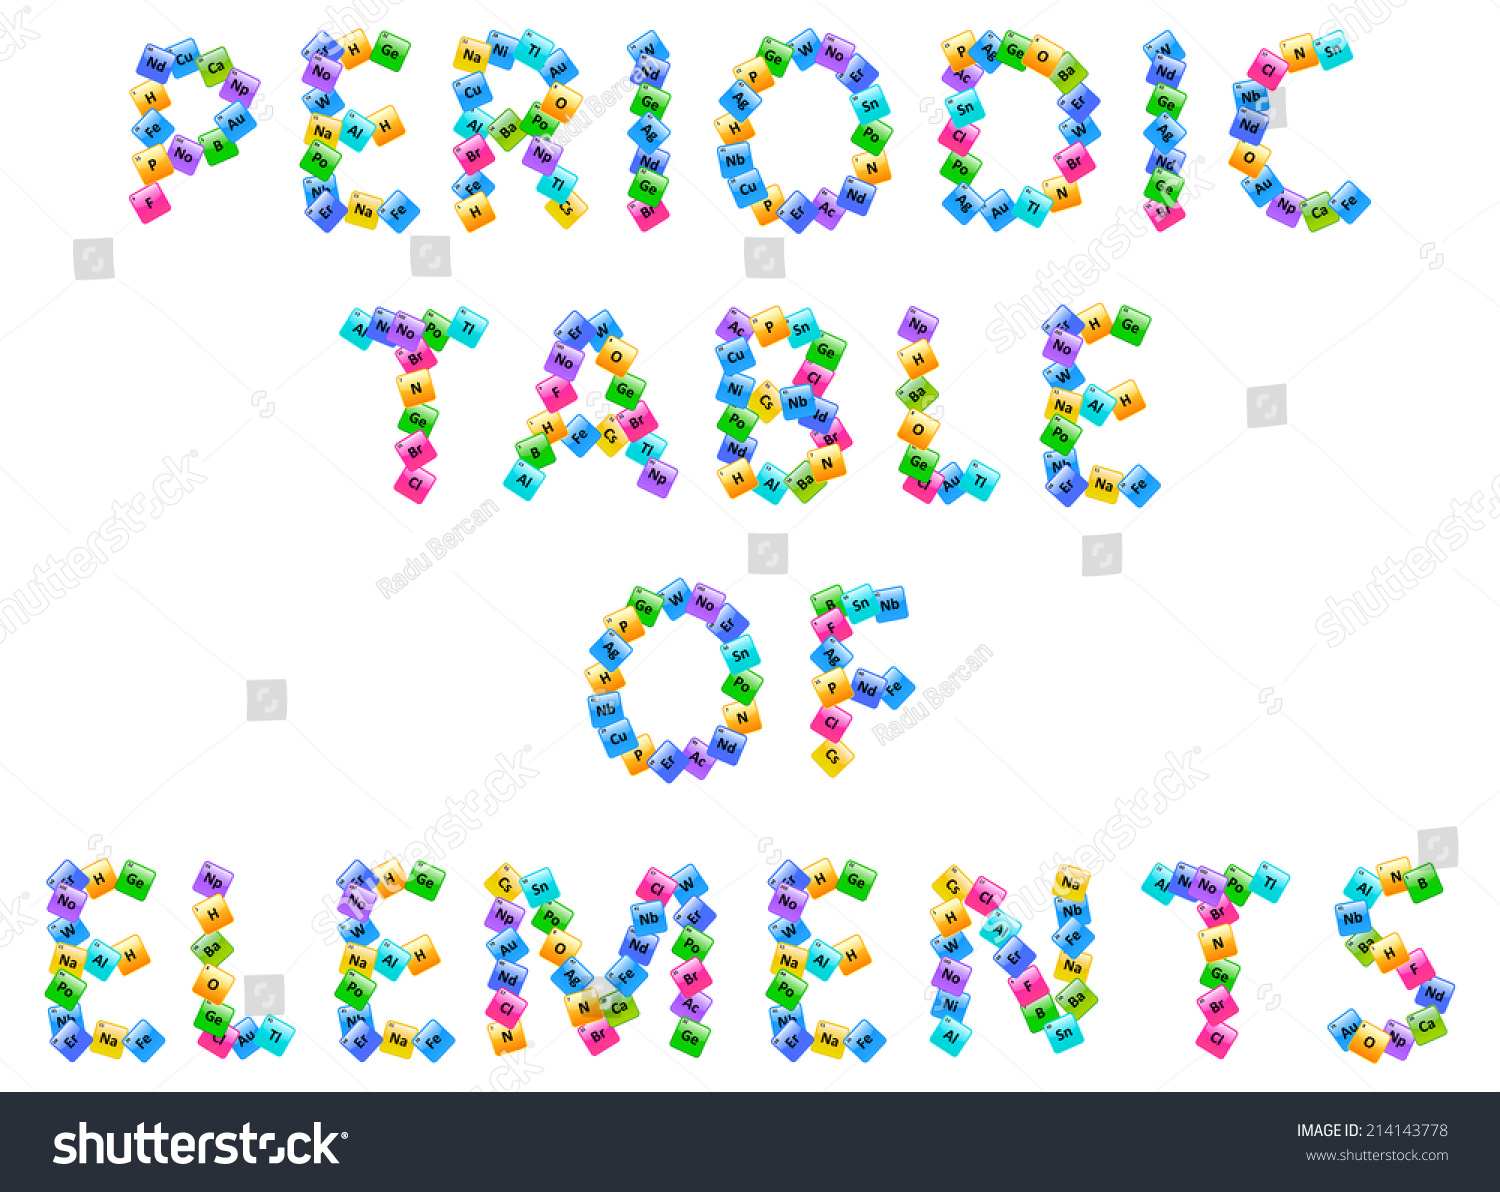 Periodic Table Word Made Basic Chemistry Stock Vector 214143778 - Shutterstock